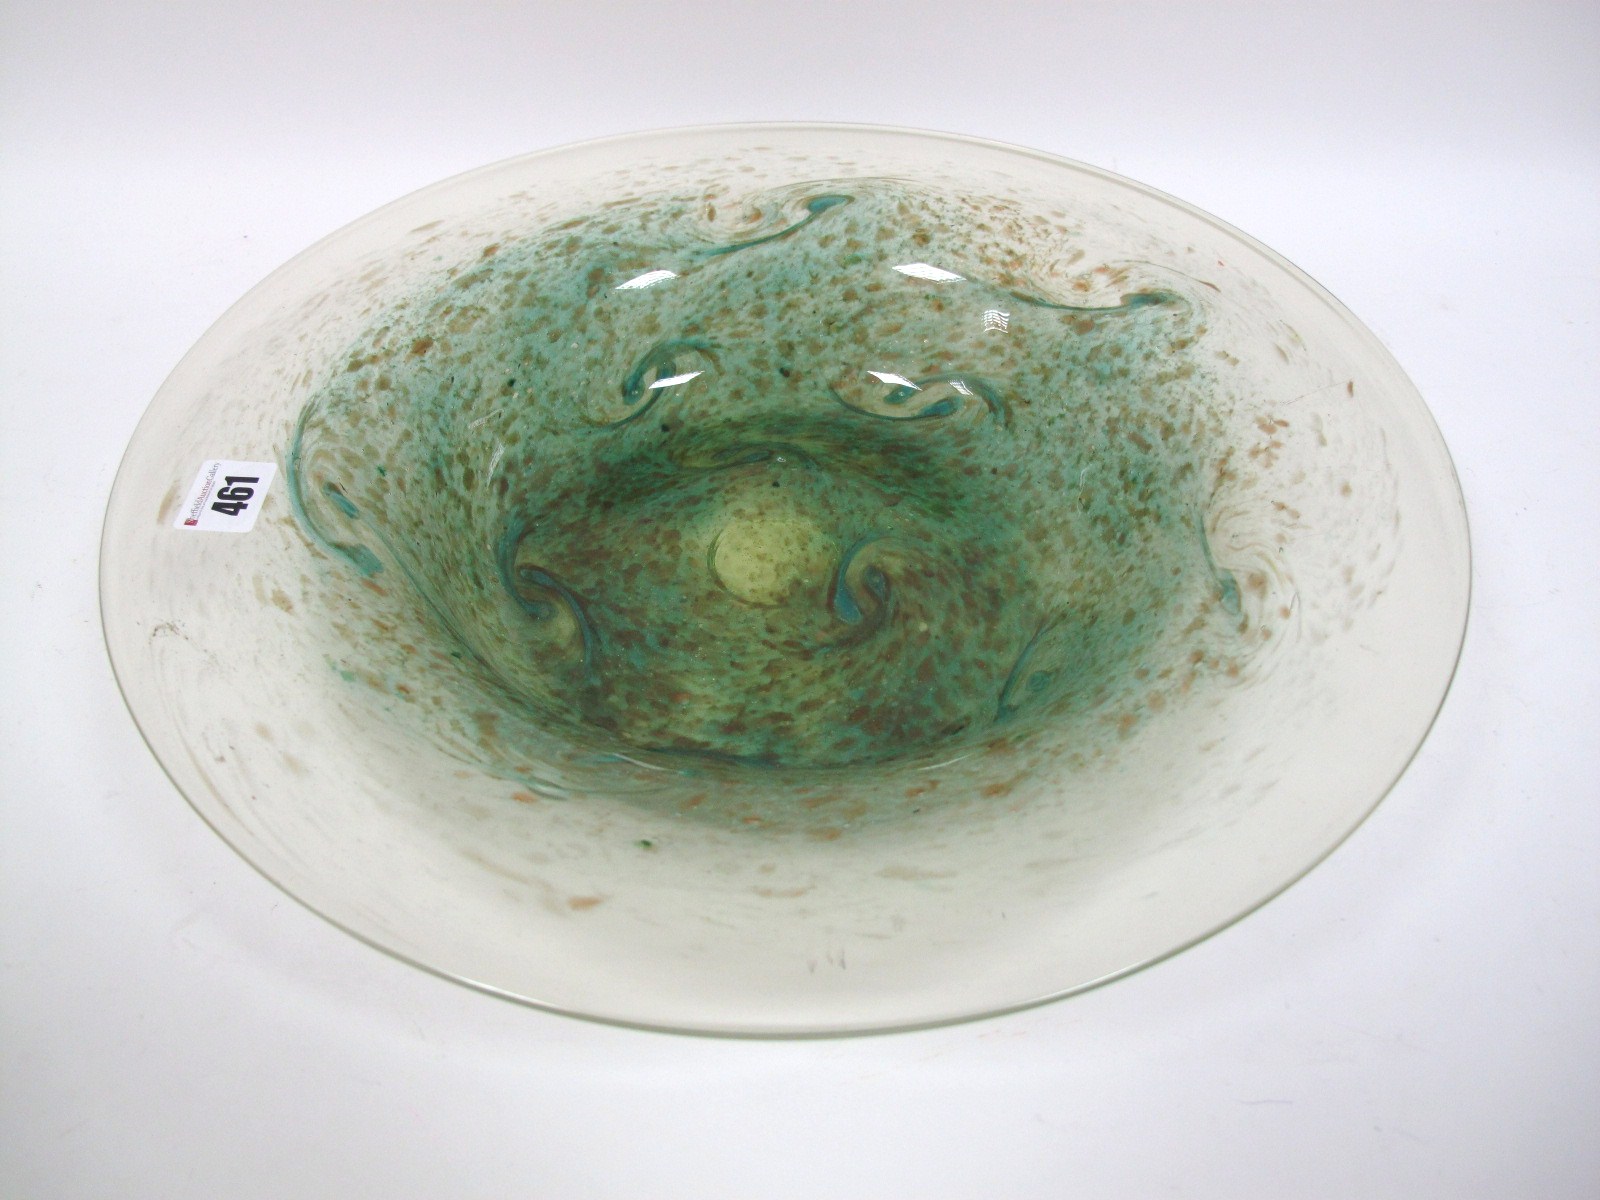 A Size III+ Shape DF Shallow Bowl with Broad Rim, blue fish design on an aventurine and mottled